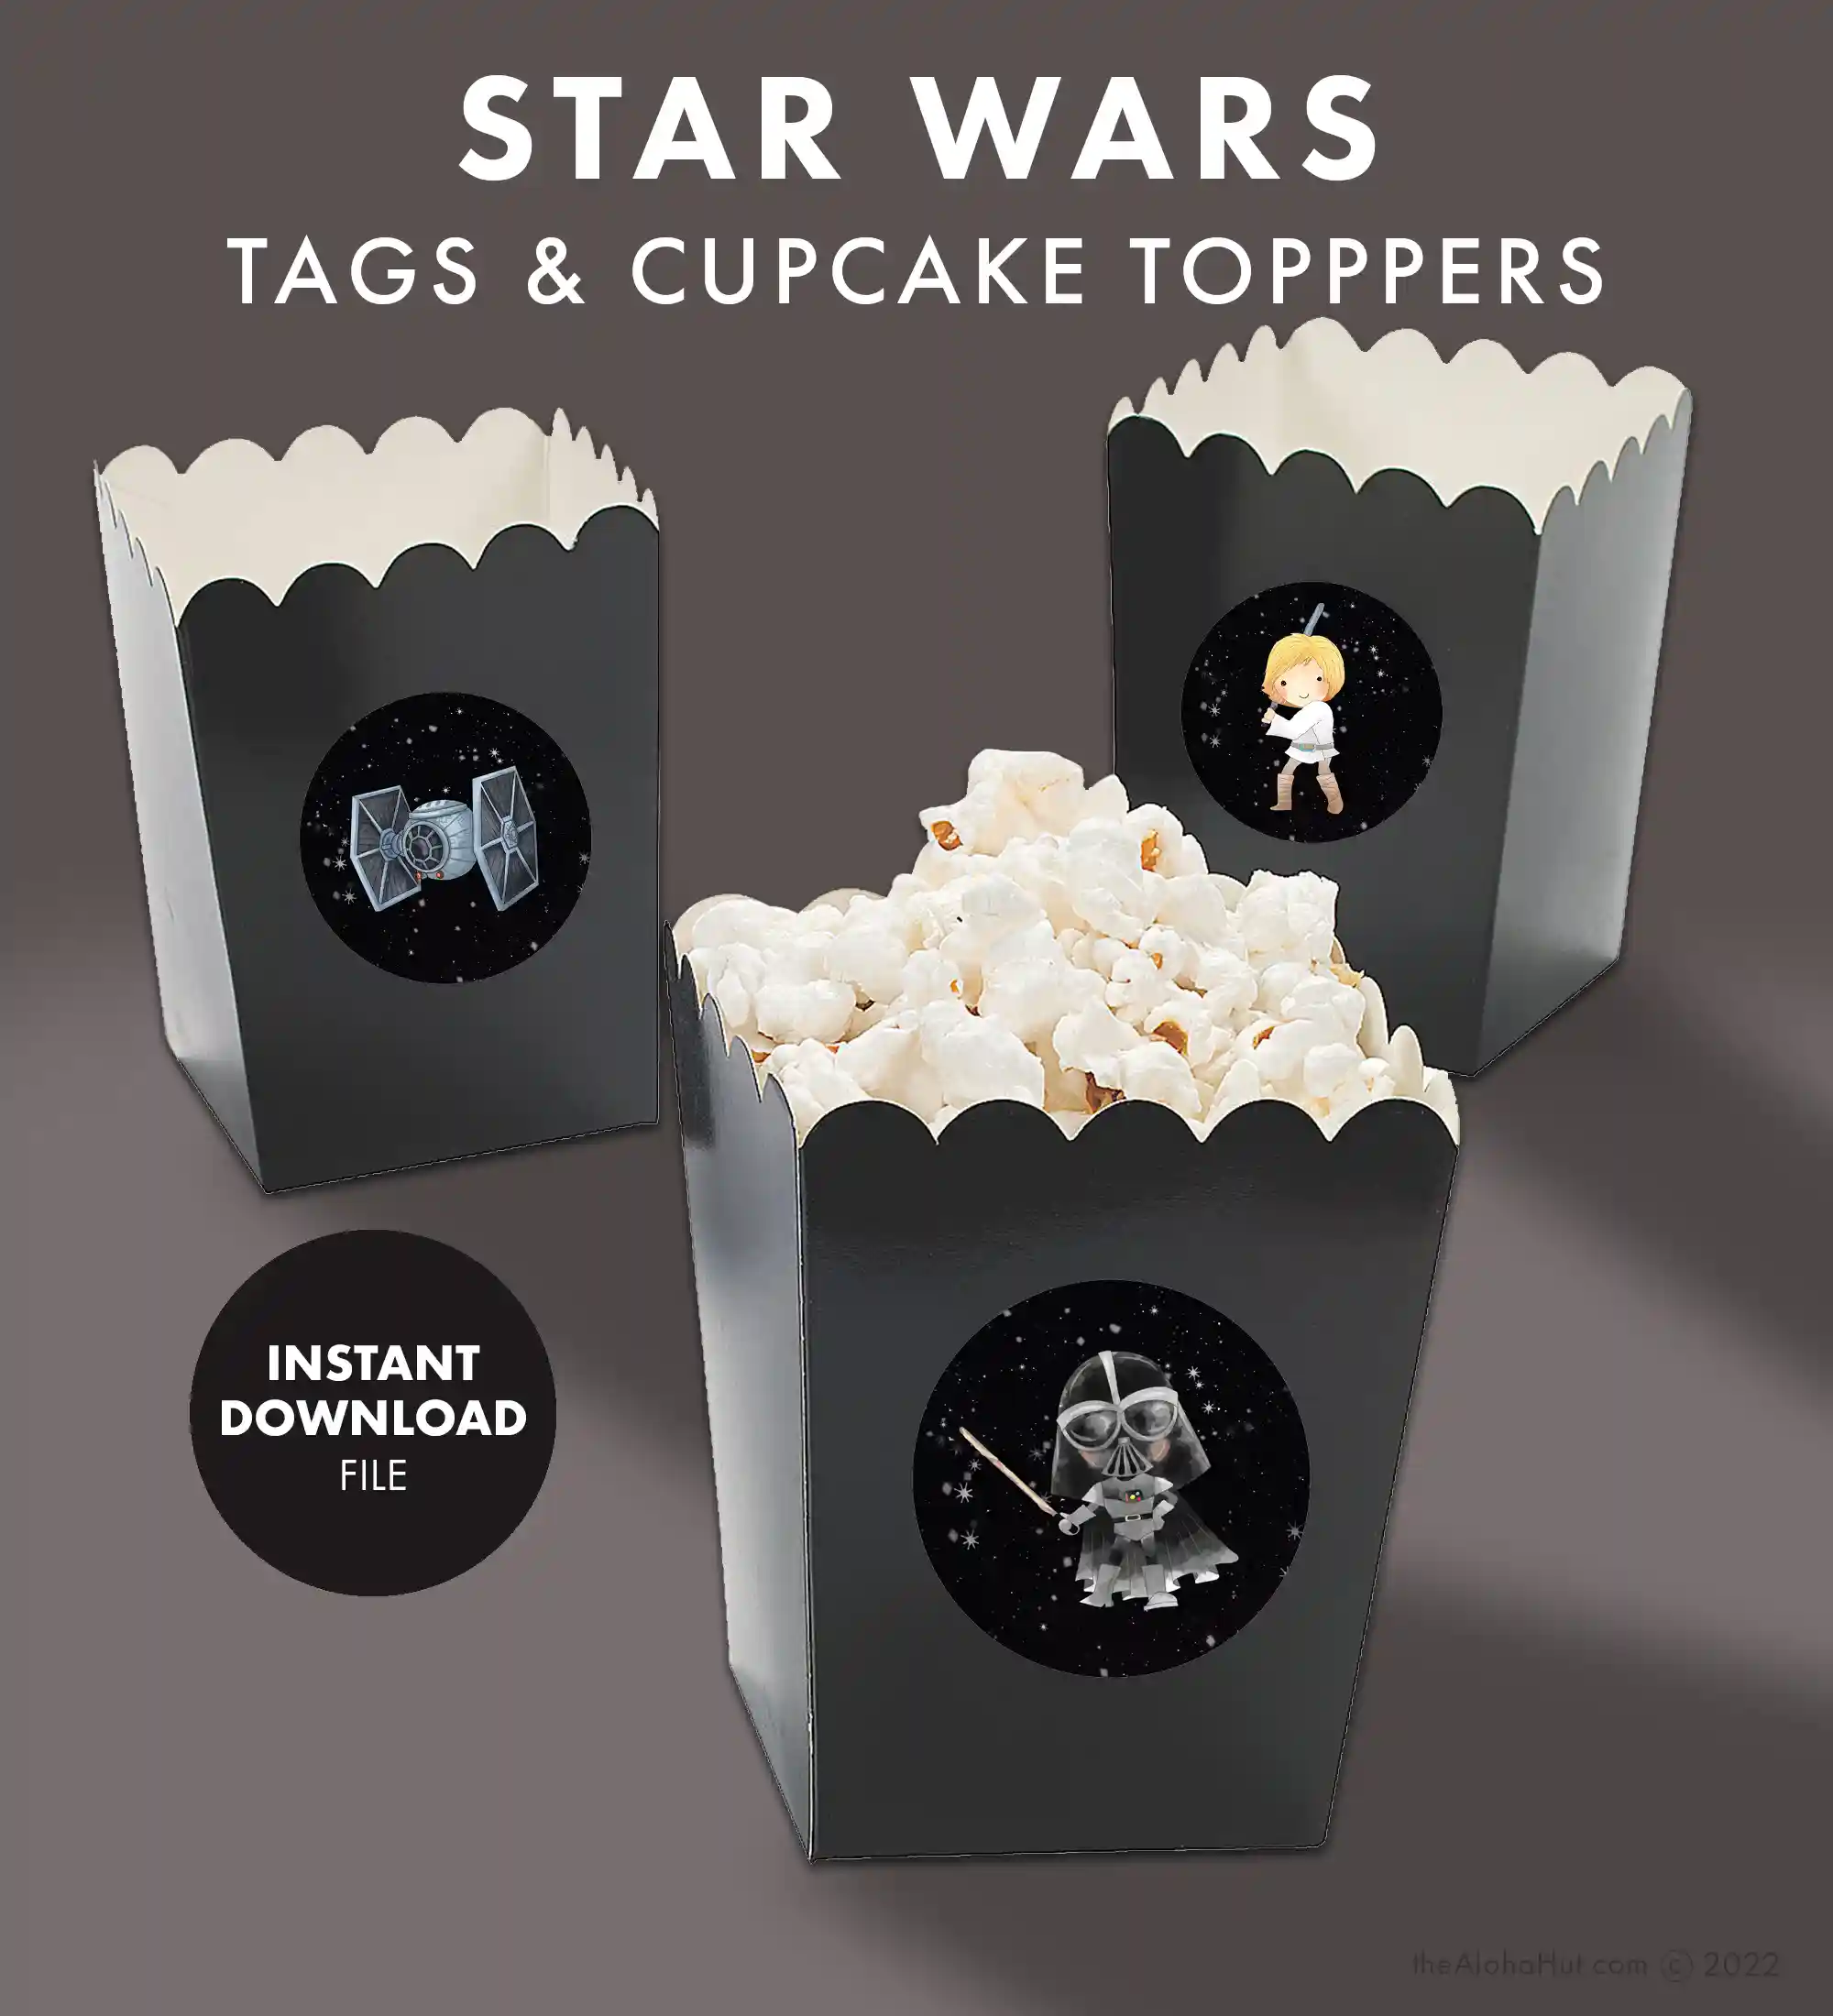 Star Wars party ideas, activities, birthday party games, decorations, and prints. Ideas and tips and tricks for throwing the best Star Wars themed kids birthday party, baby shower, or one with the force celebration. Includes Star Wars printable games, decorations (cupcake toppers, banners, gift tags, characters) and Star Wars party games (BINGO, scavenger hunt, pin the lightsaber on Yoda or Darth Vader). Star wars cupcake toppers and tags.